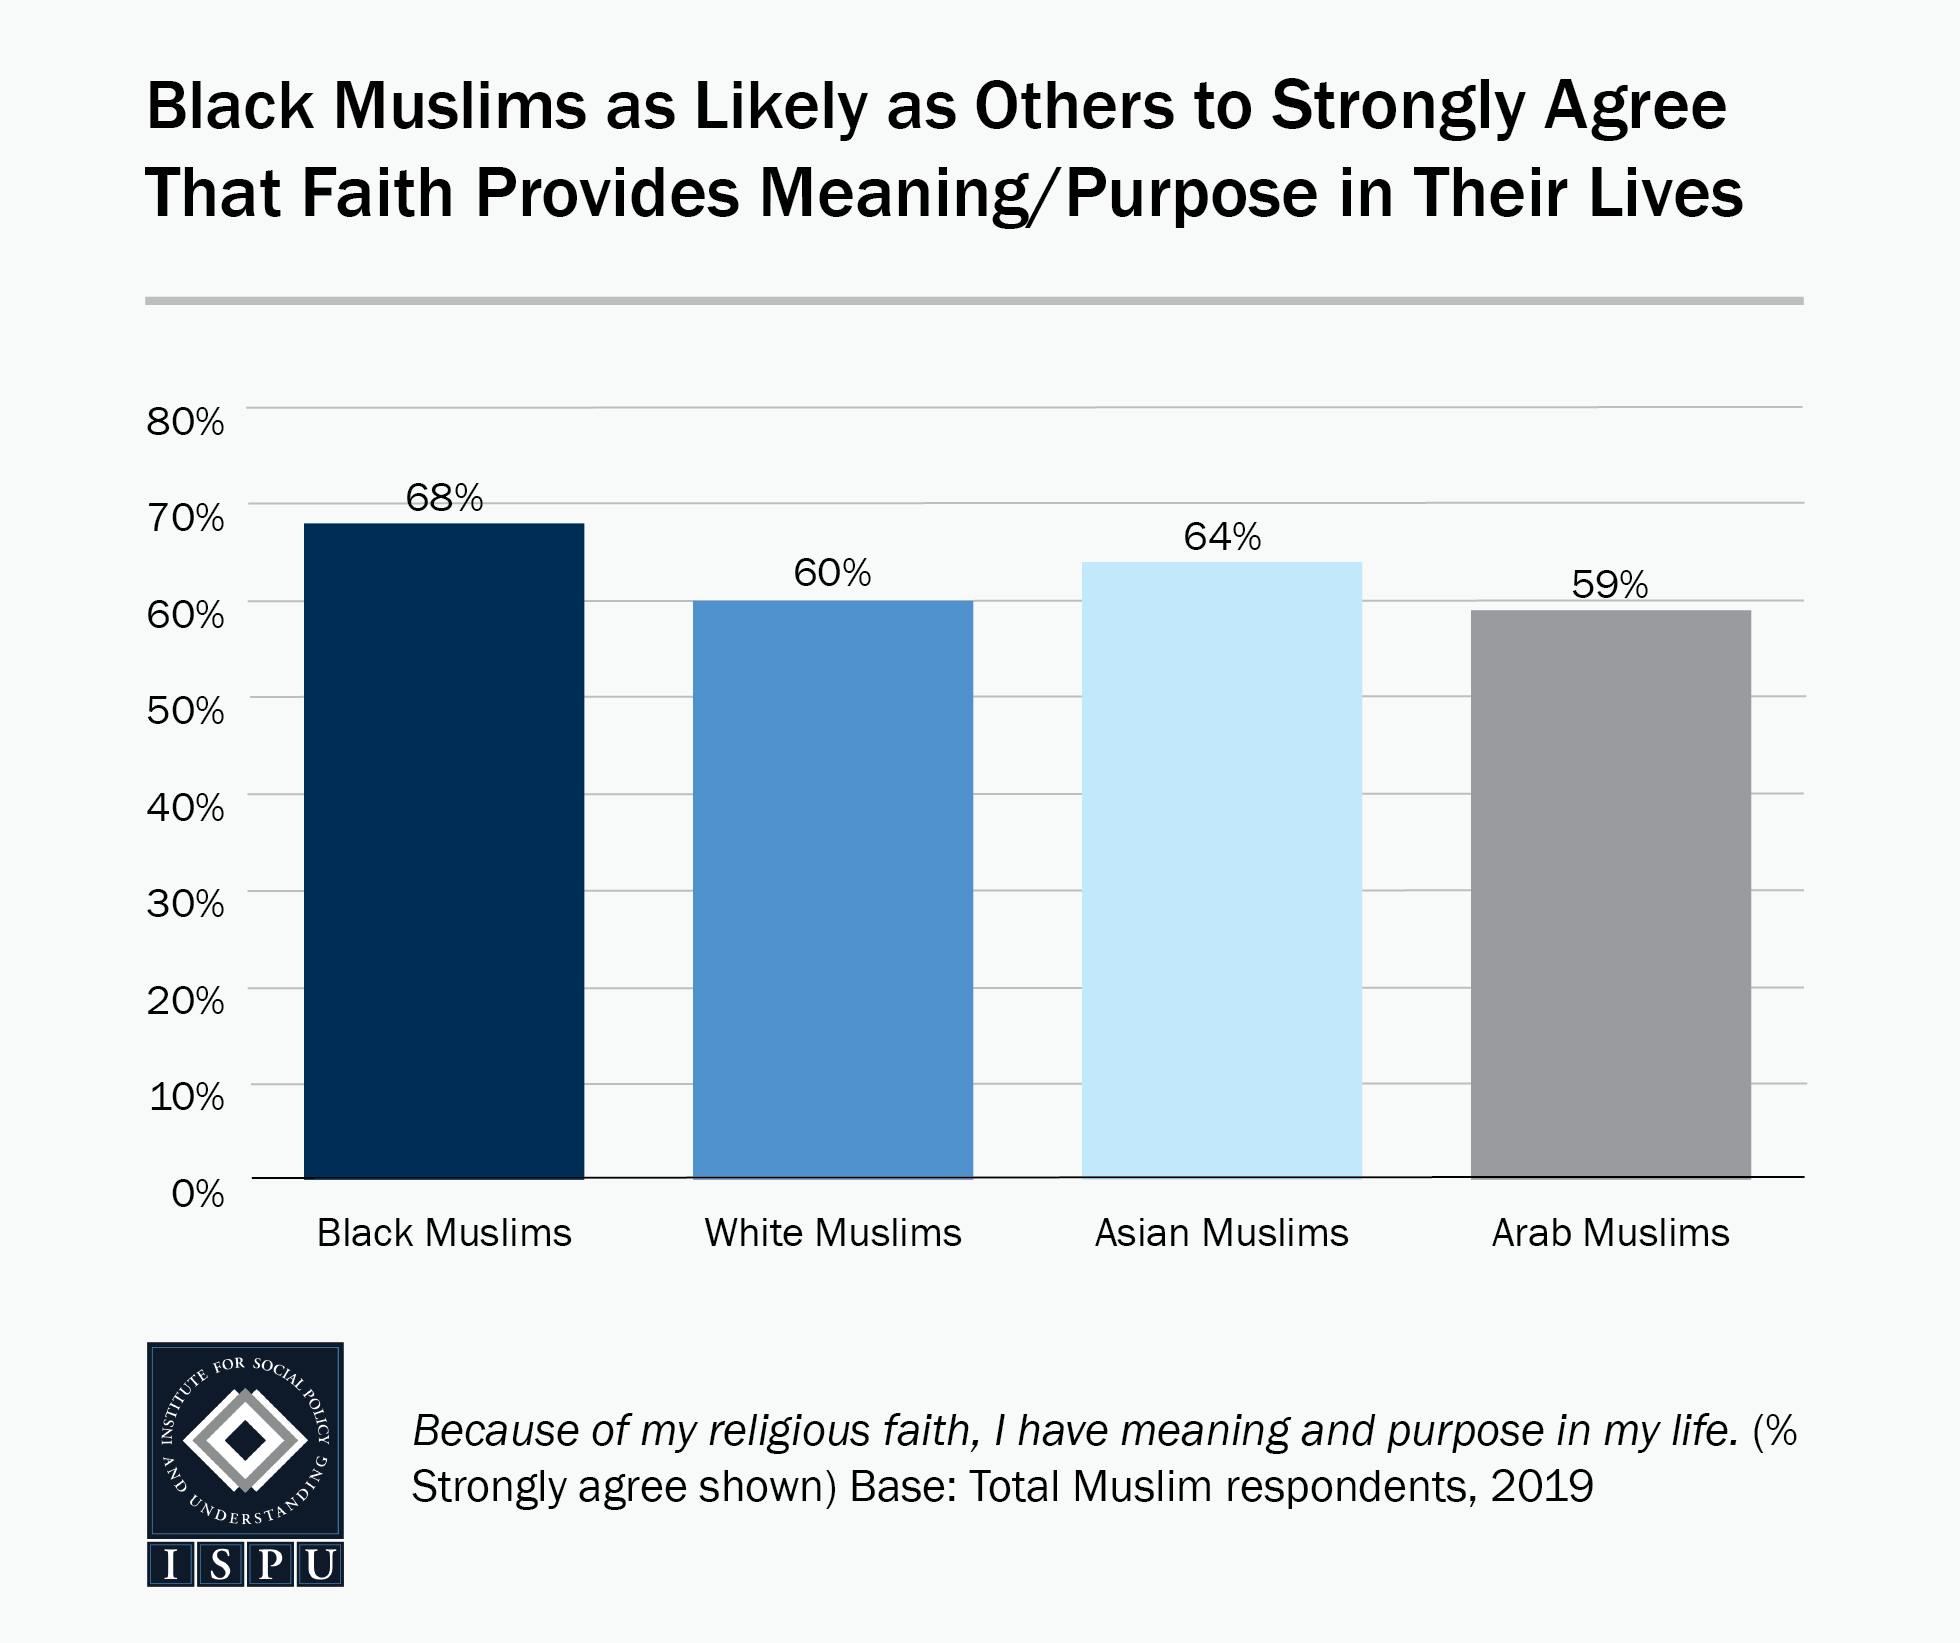 Bar graph showing that Black Muslims (68%) are as likely as others (59%-64%) to strongly agree that faith provides meaning and purpose in their lives